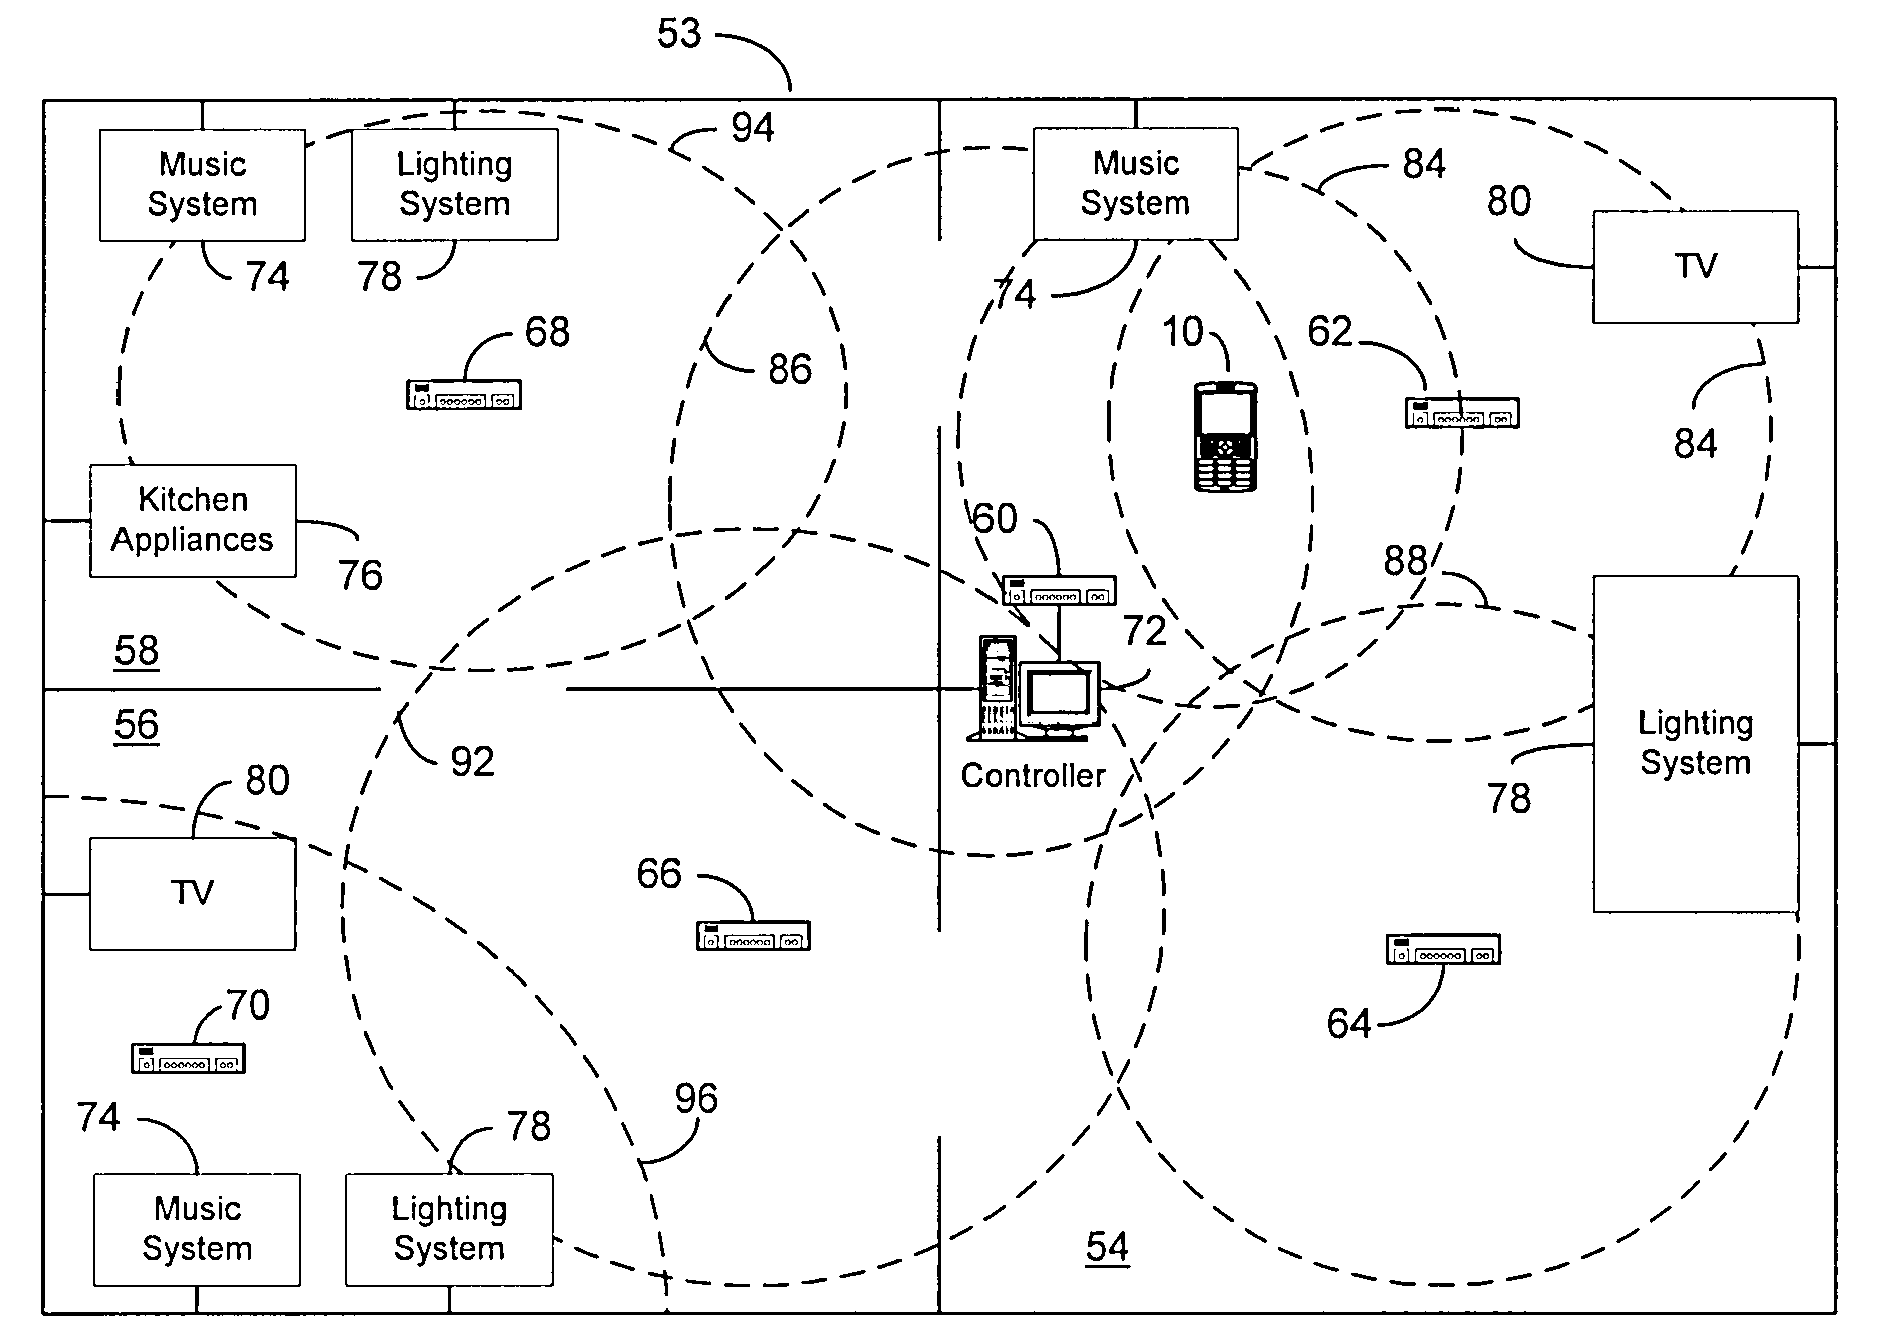 User interface for an electronic device used as a home controller